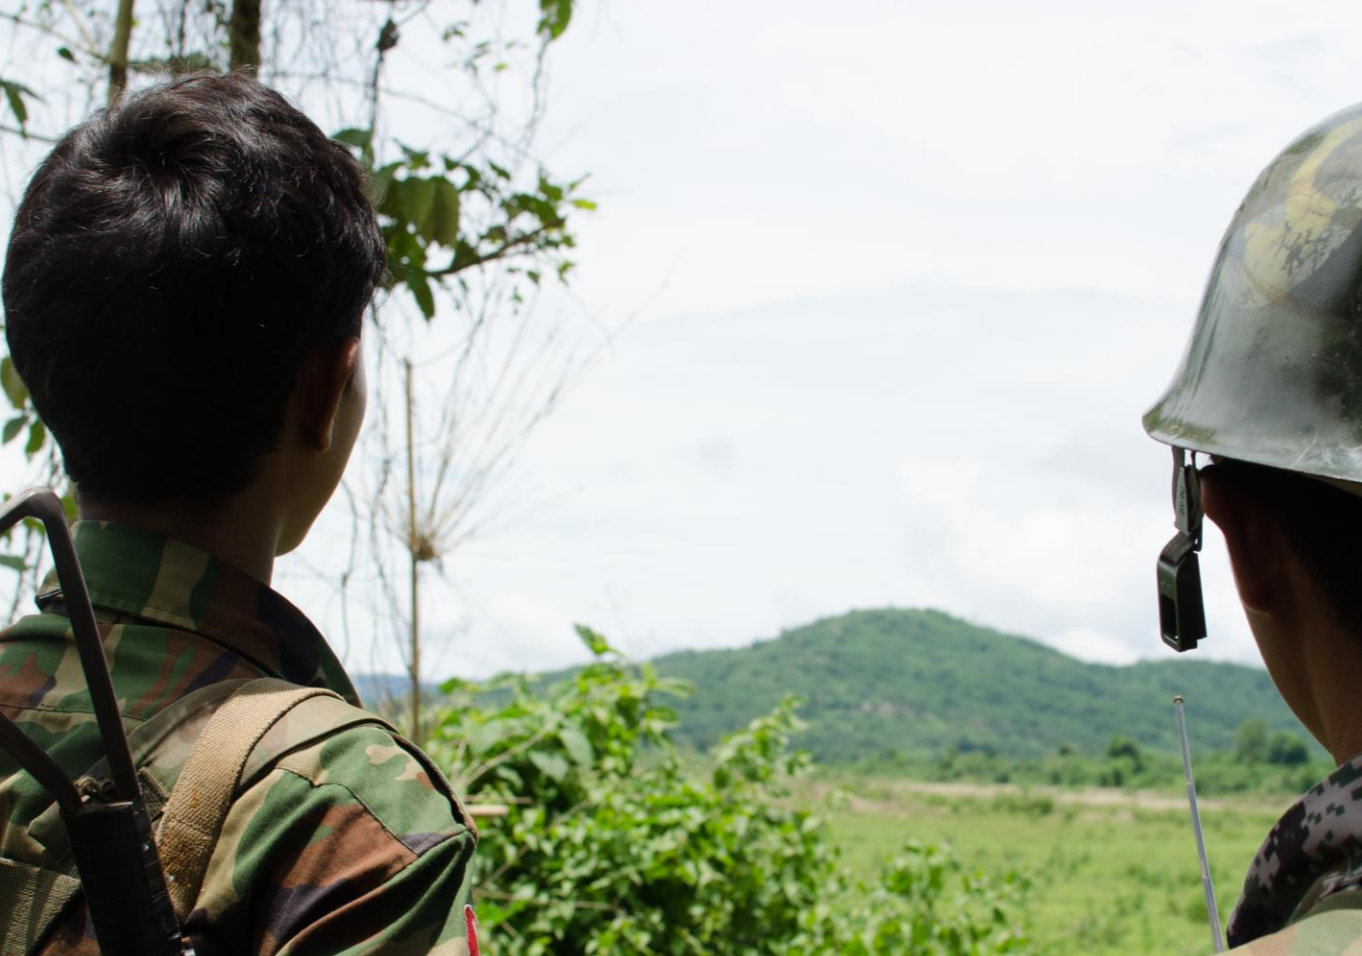 Two soldiers from the Kachin Independence Army  look out at the hills near Laiza, in an area of Kachin State controlled by the KIA, June 2013. Photo: Amnesty International / Daniel Quinlan